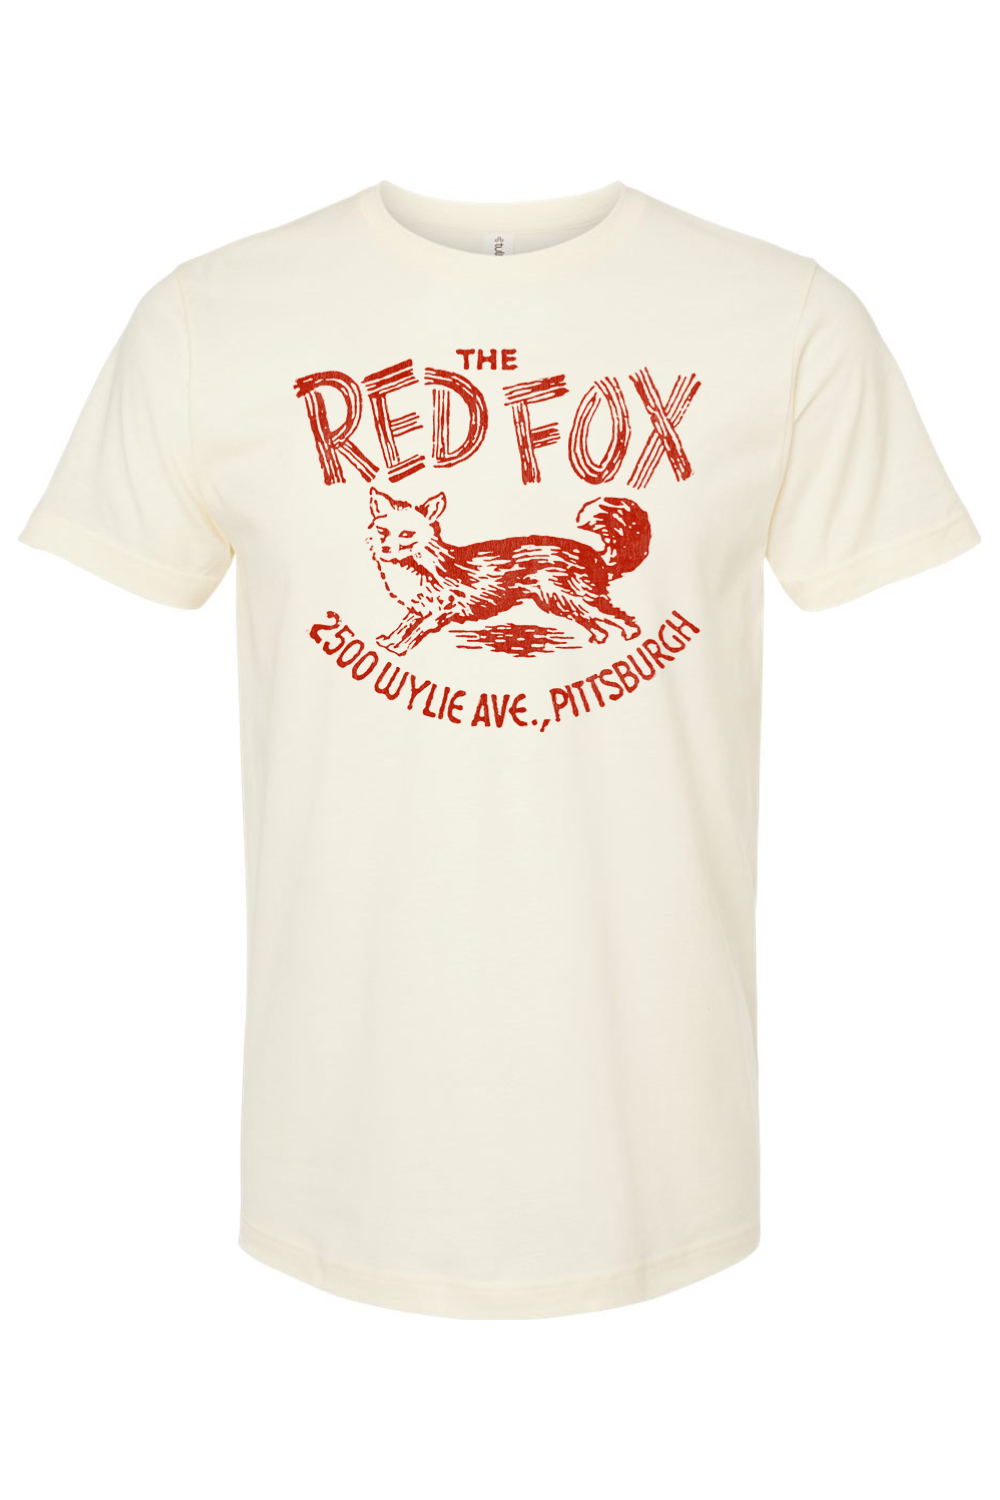 The Red Fox - Pittsburgh